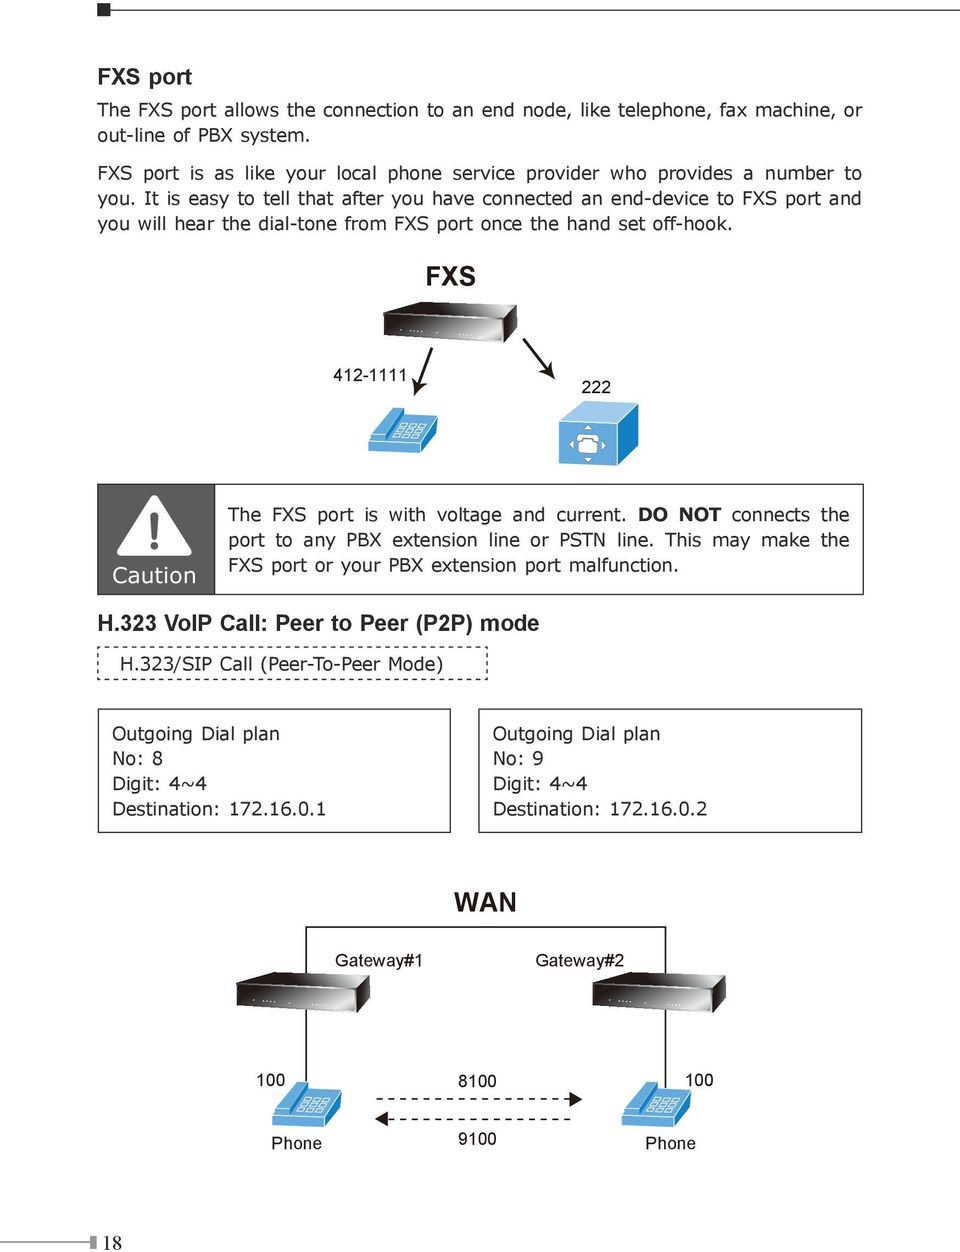 323 VoIP Call: Peer to Peer (P2P) mode Gateway#1 The FXS port is with voltage and current. DO NOT connects the port to any PBX extension line or PSTN line.